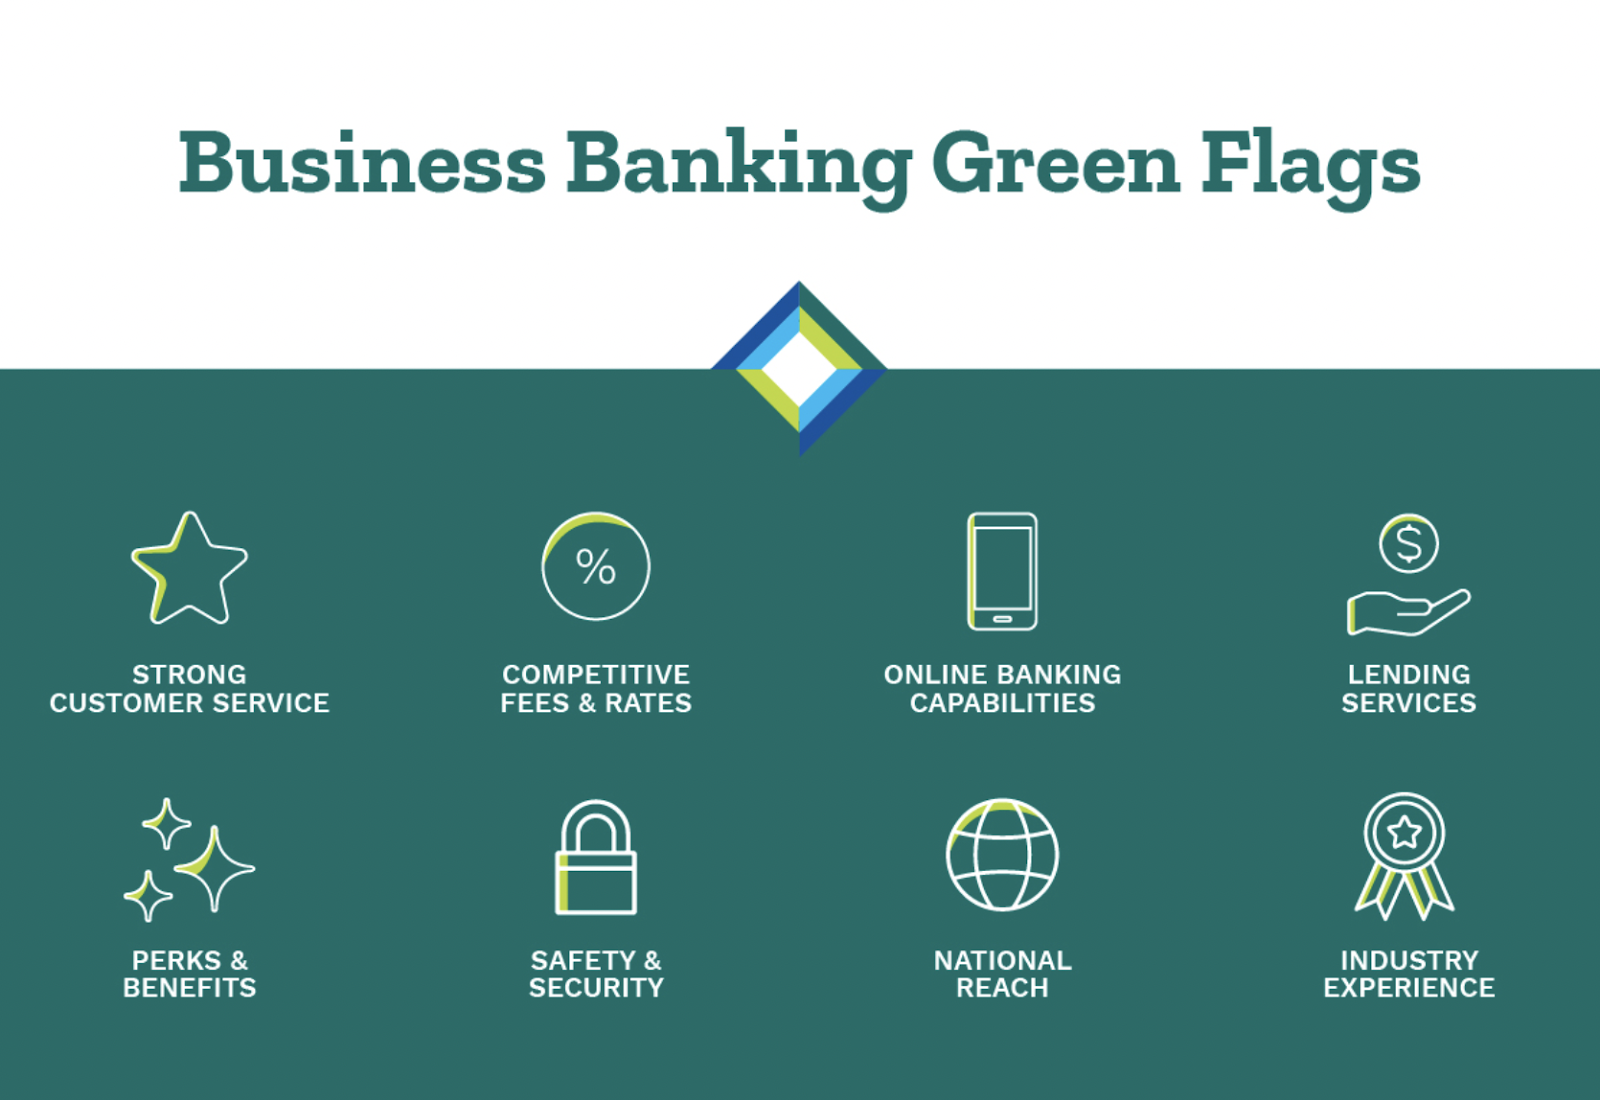 Banking 101 - Green Flags